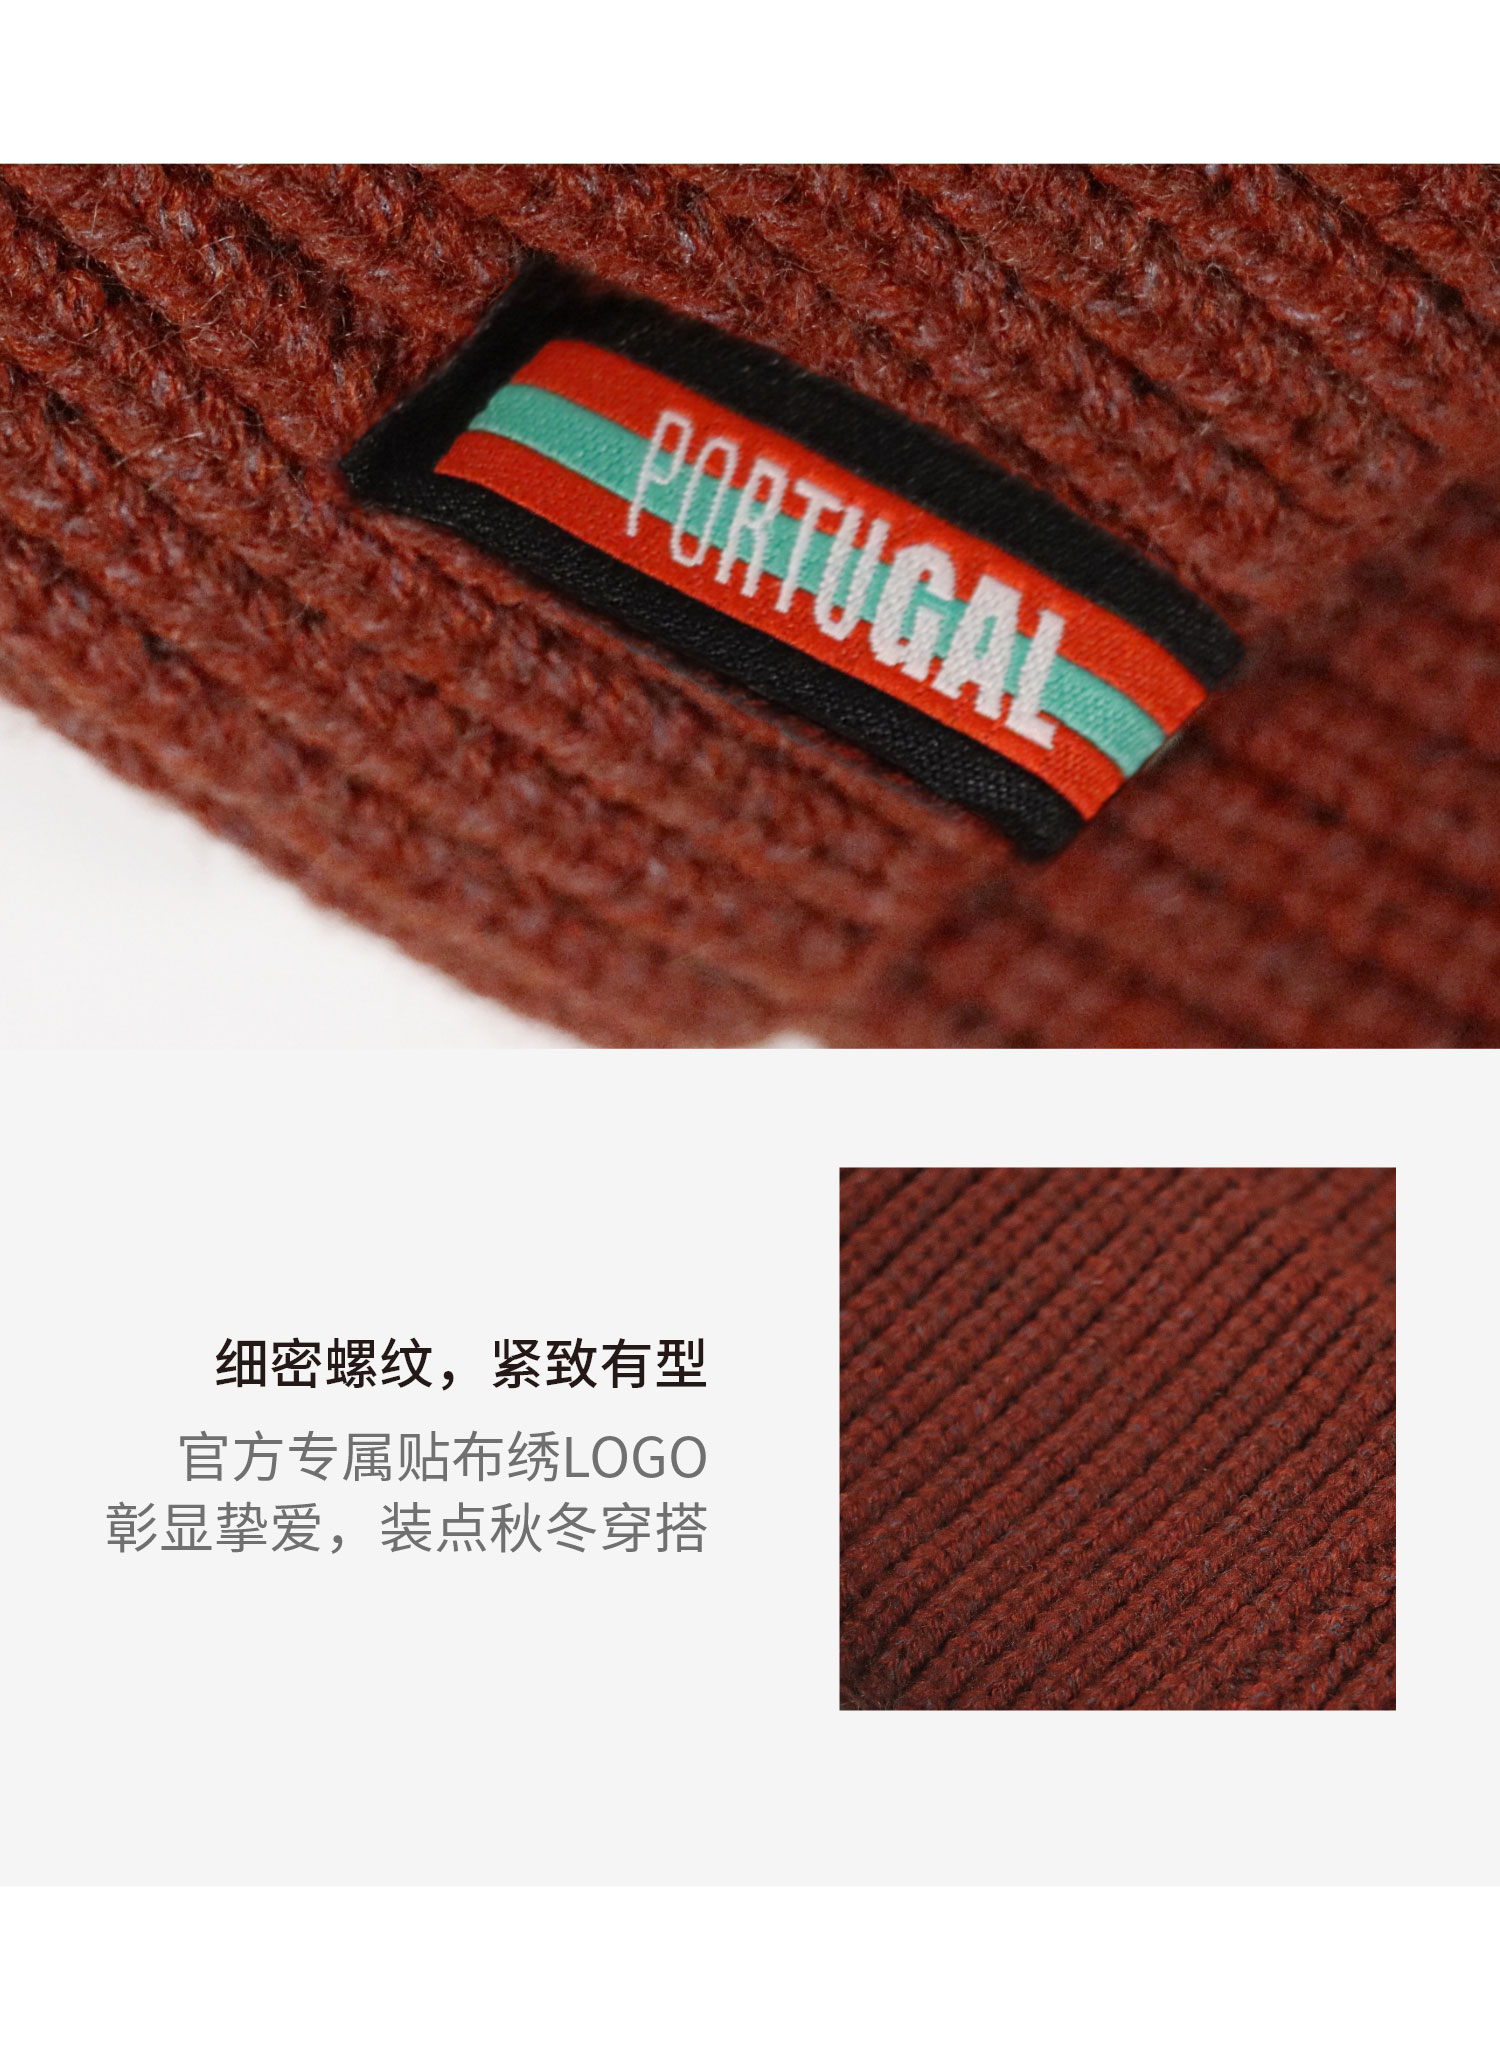 Portugal National Team Official Knitted Wool Cap